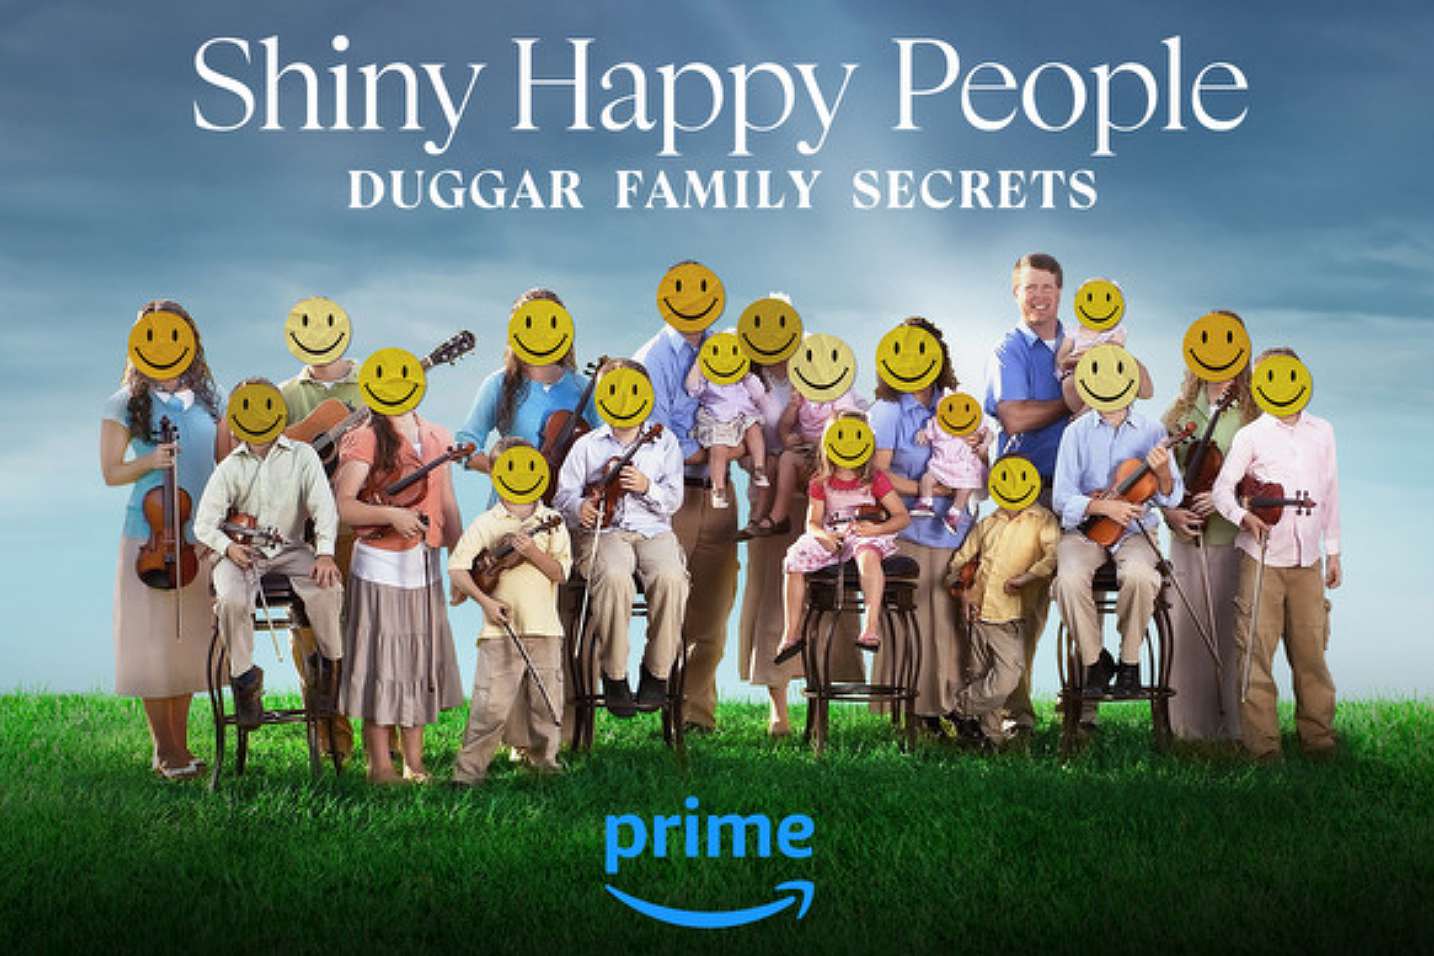 Shiny Happy People: What the Duggar documentary tells us about post-Christian America